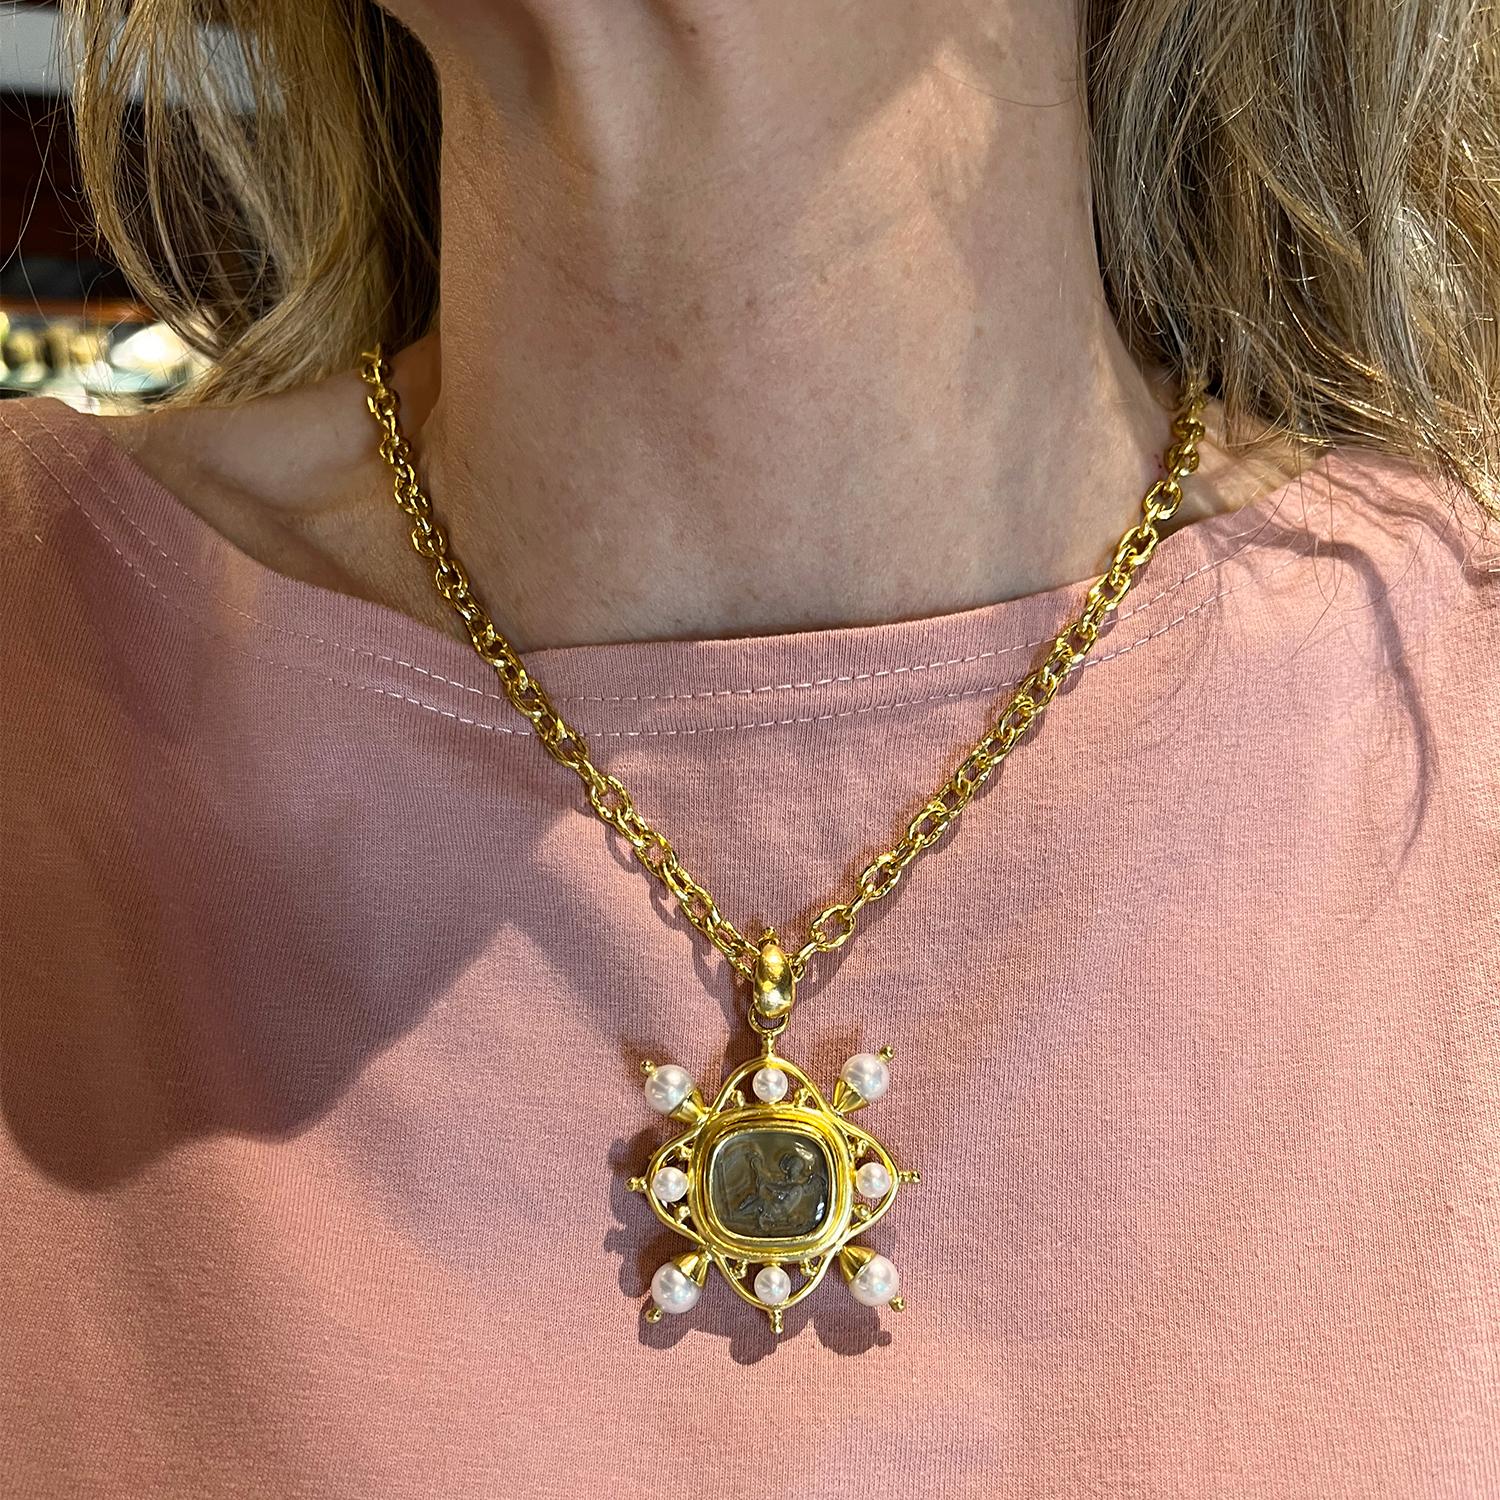 This Elizabeth Locke 19k yellow gold, Venetian glass and pearl pendant is an exquisitely crafted piece of jewelry that seamlessly combines timeless elegance with contemporary design. The stunning pendant is created from solid 19k yellow gold and